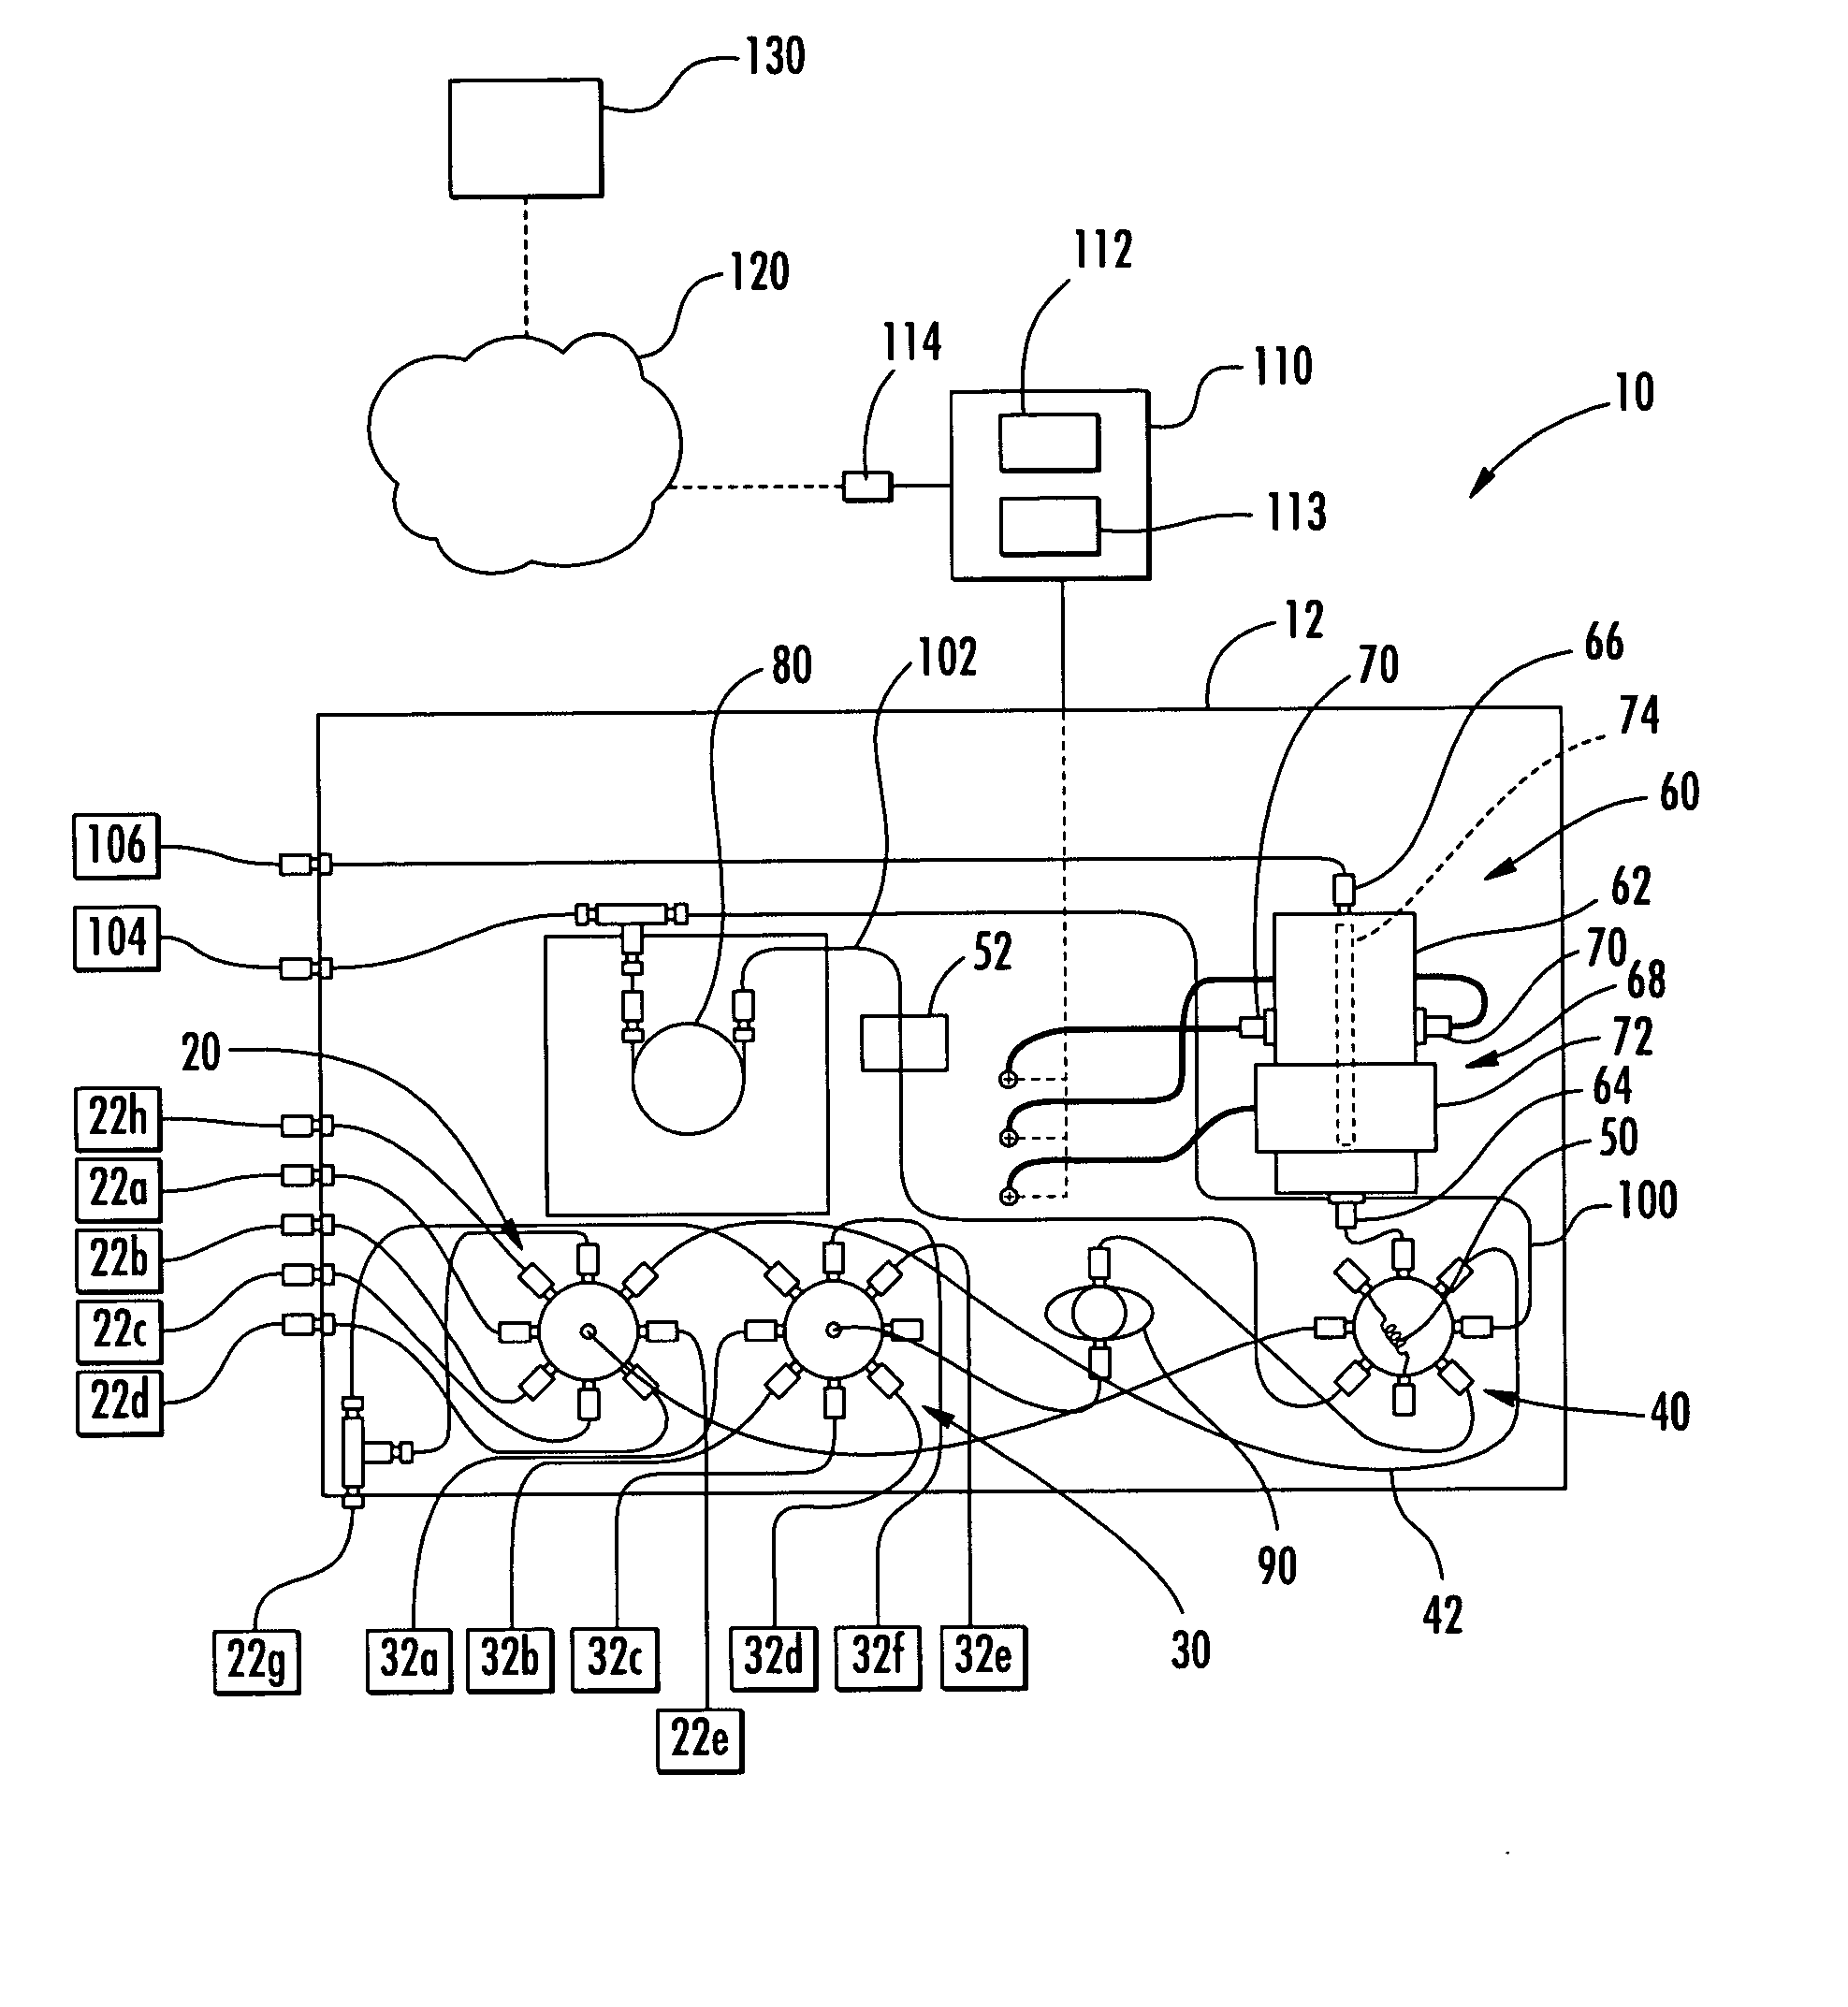 Apparatus and method for chemical analysis